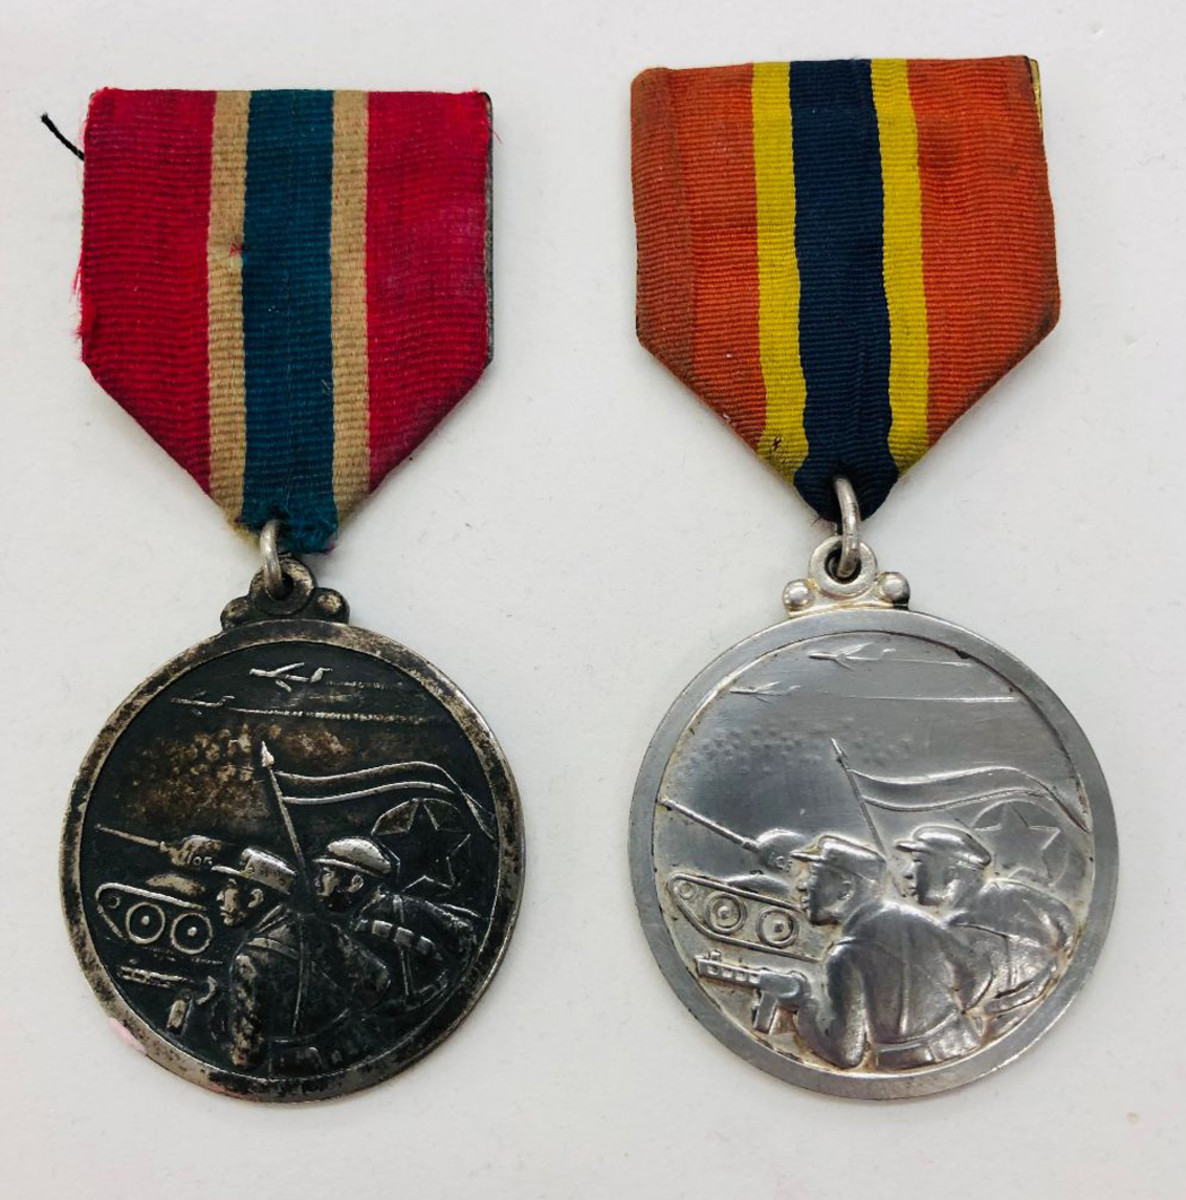 The Fatherland Liberation War Commemoration medal is often seen in two primary variations. Over the years, many variations in details of the medal can be found for the collector.